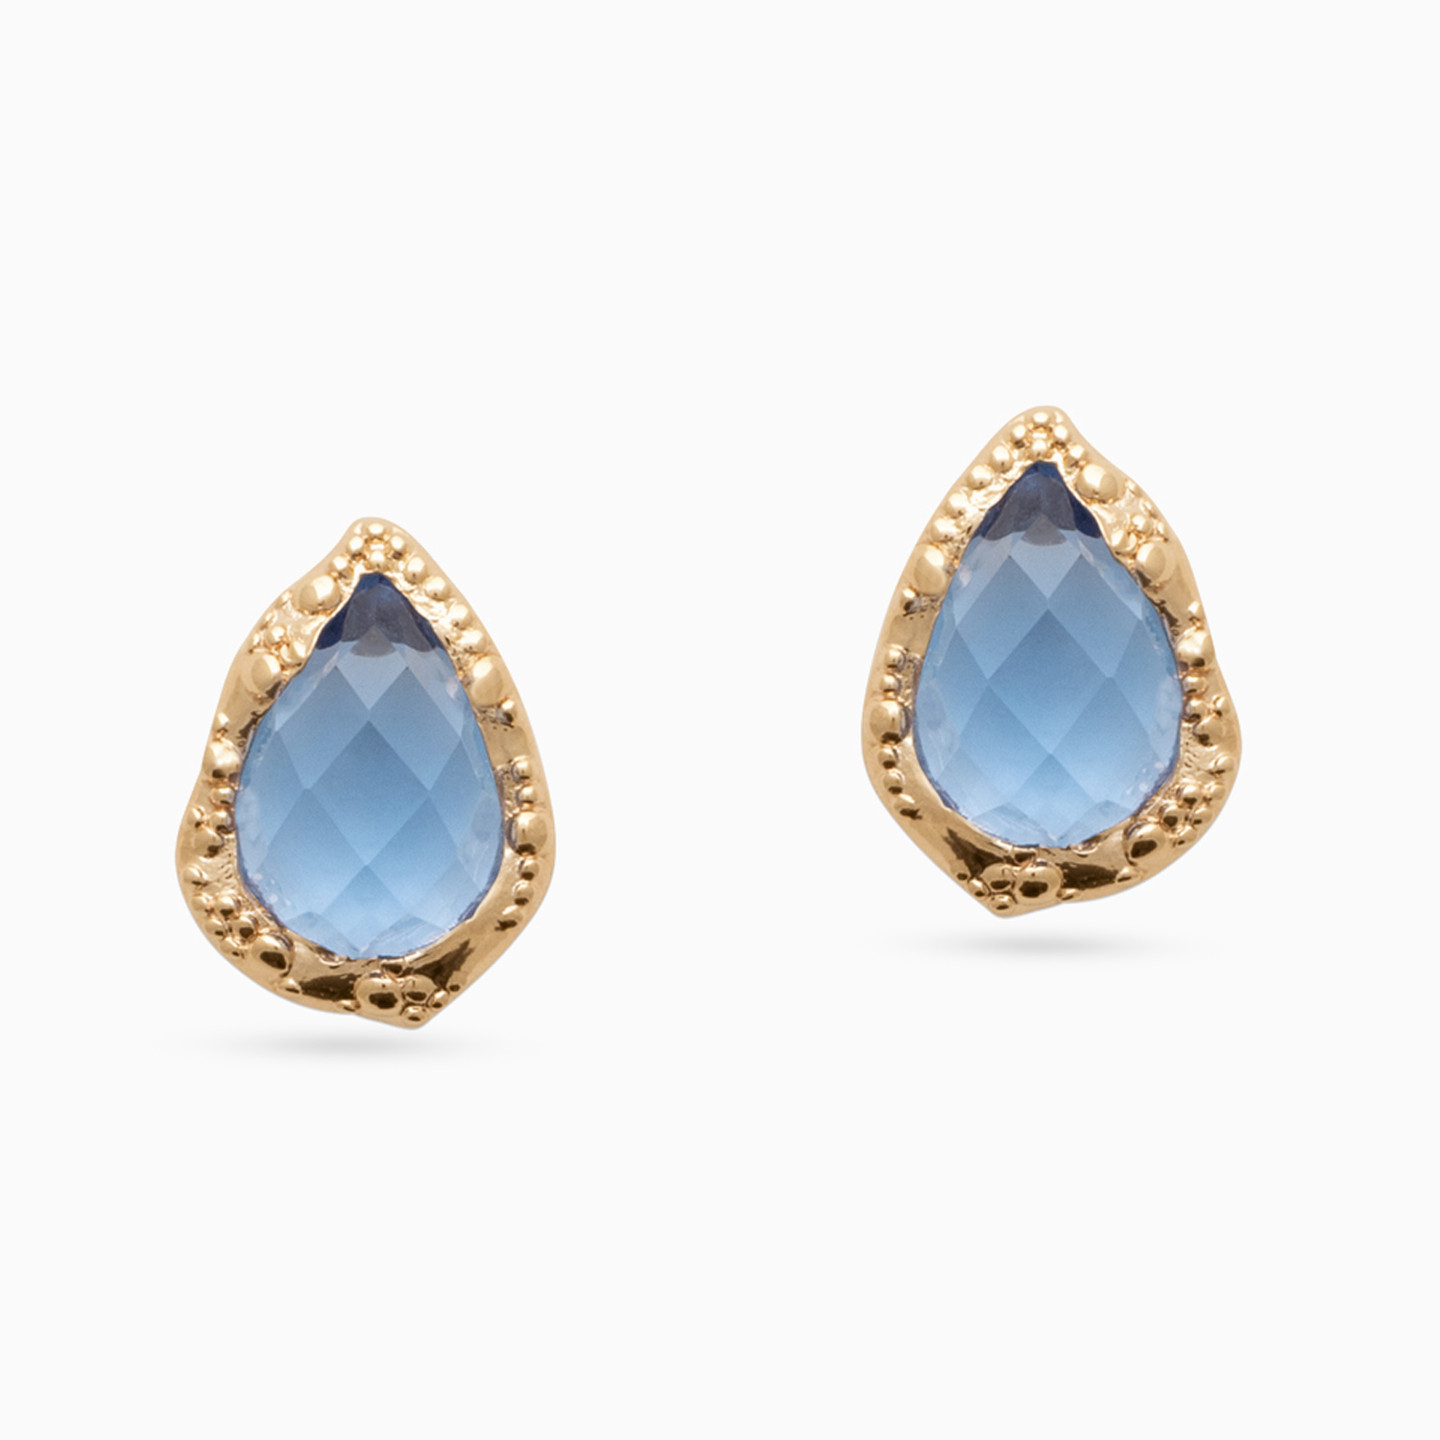 Gold Plated Colored Stones Stud Earrings